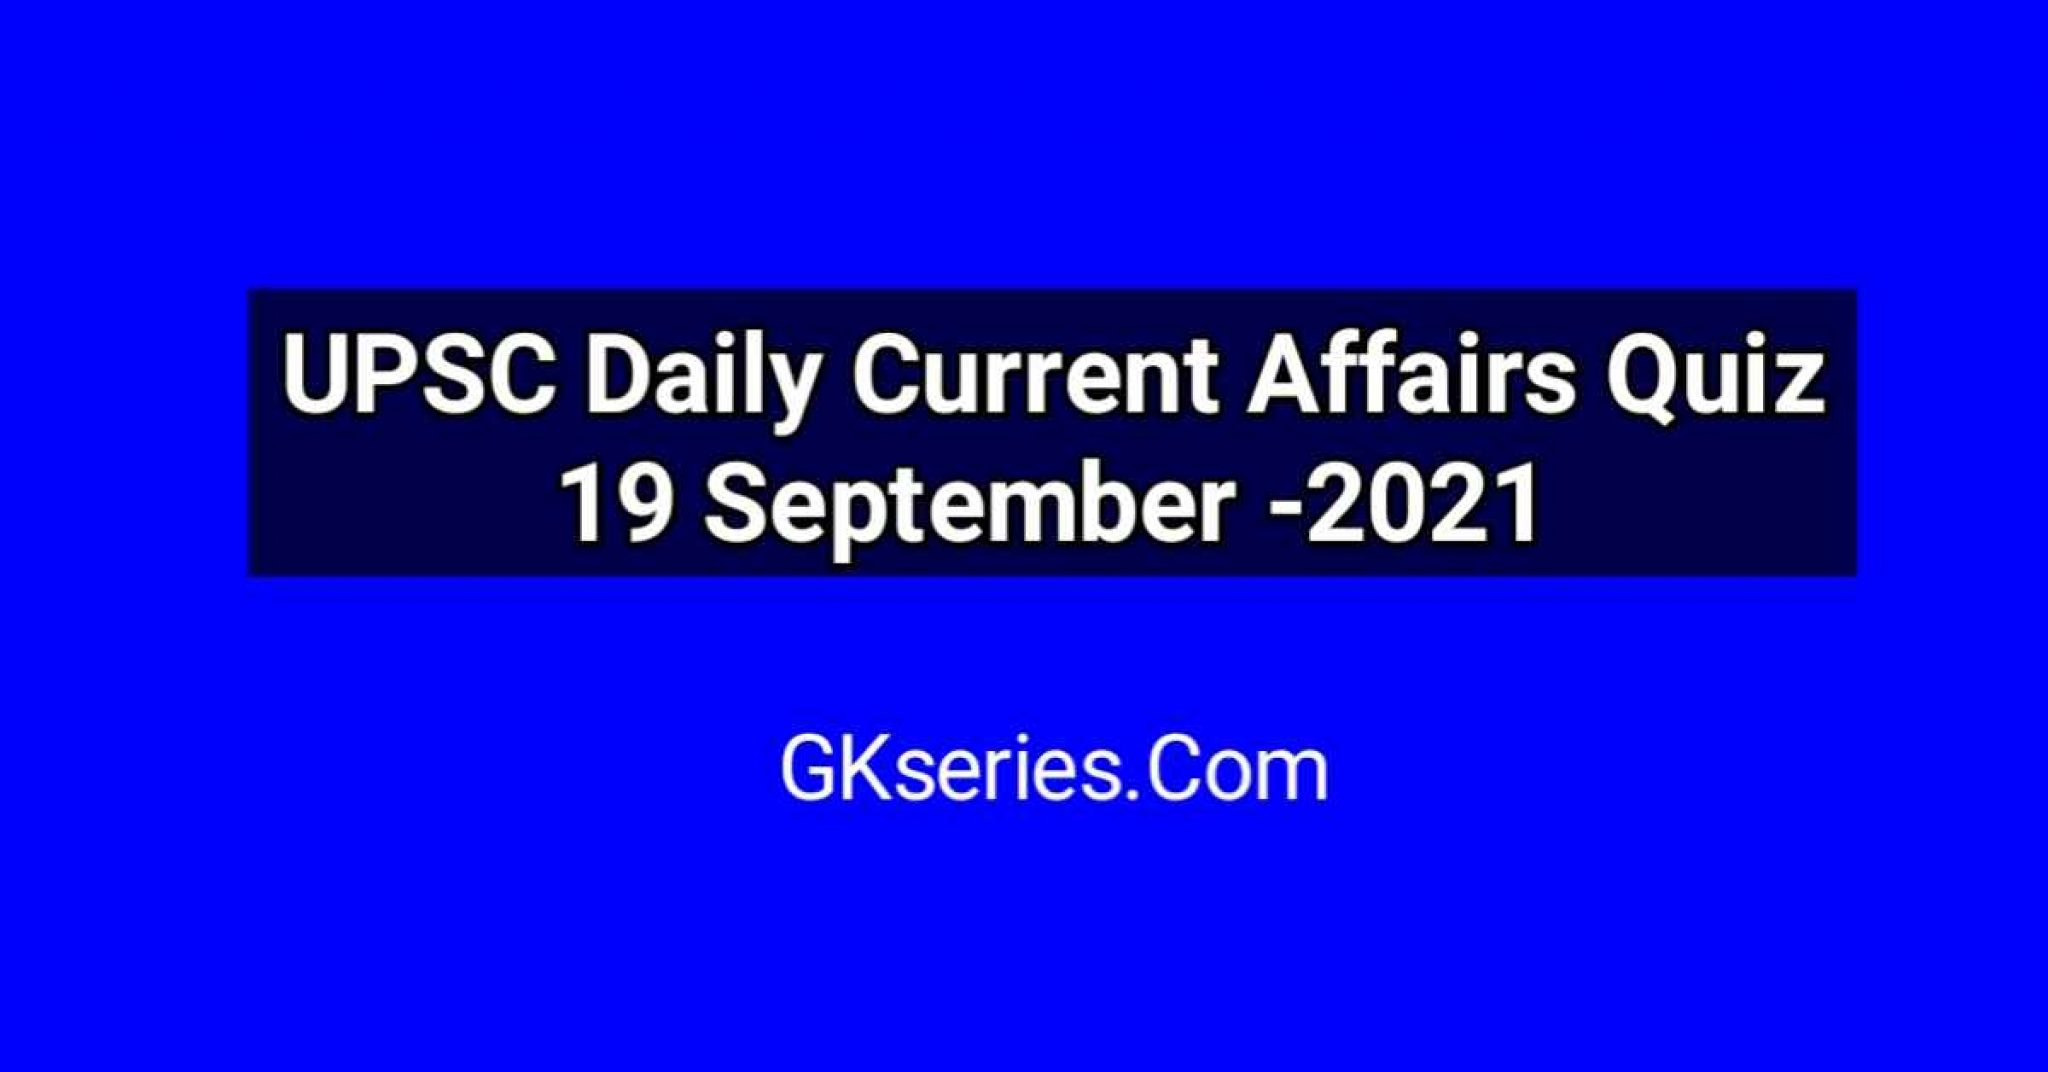 Upsc Daily Current Affairs Quiz 19 September 2021 5020